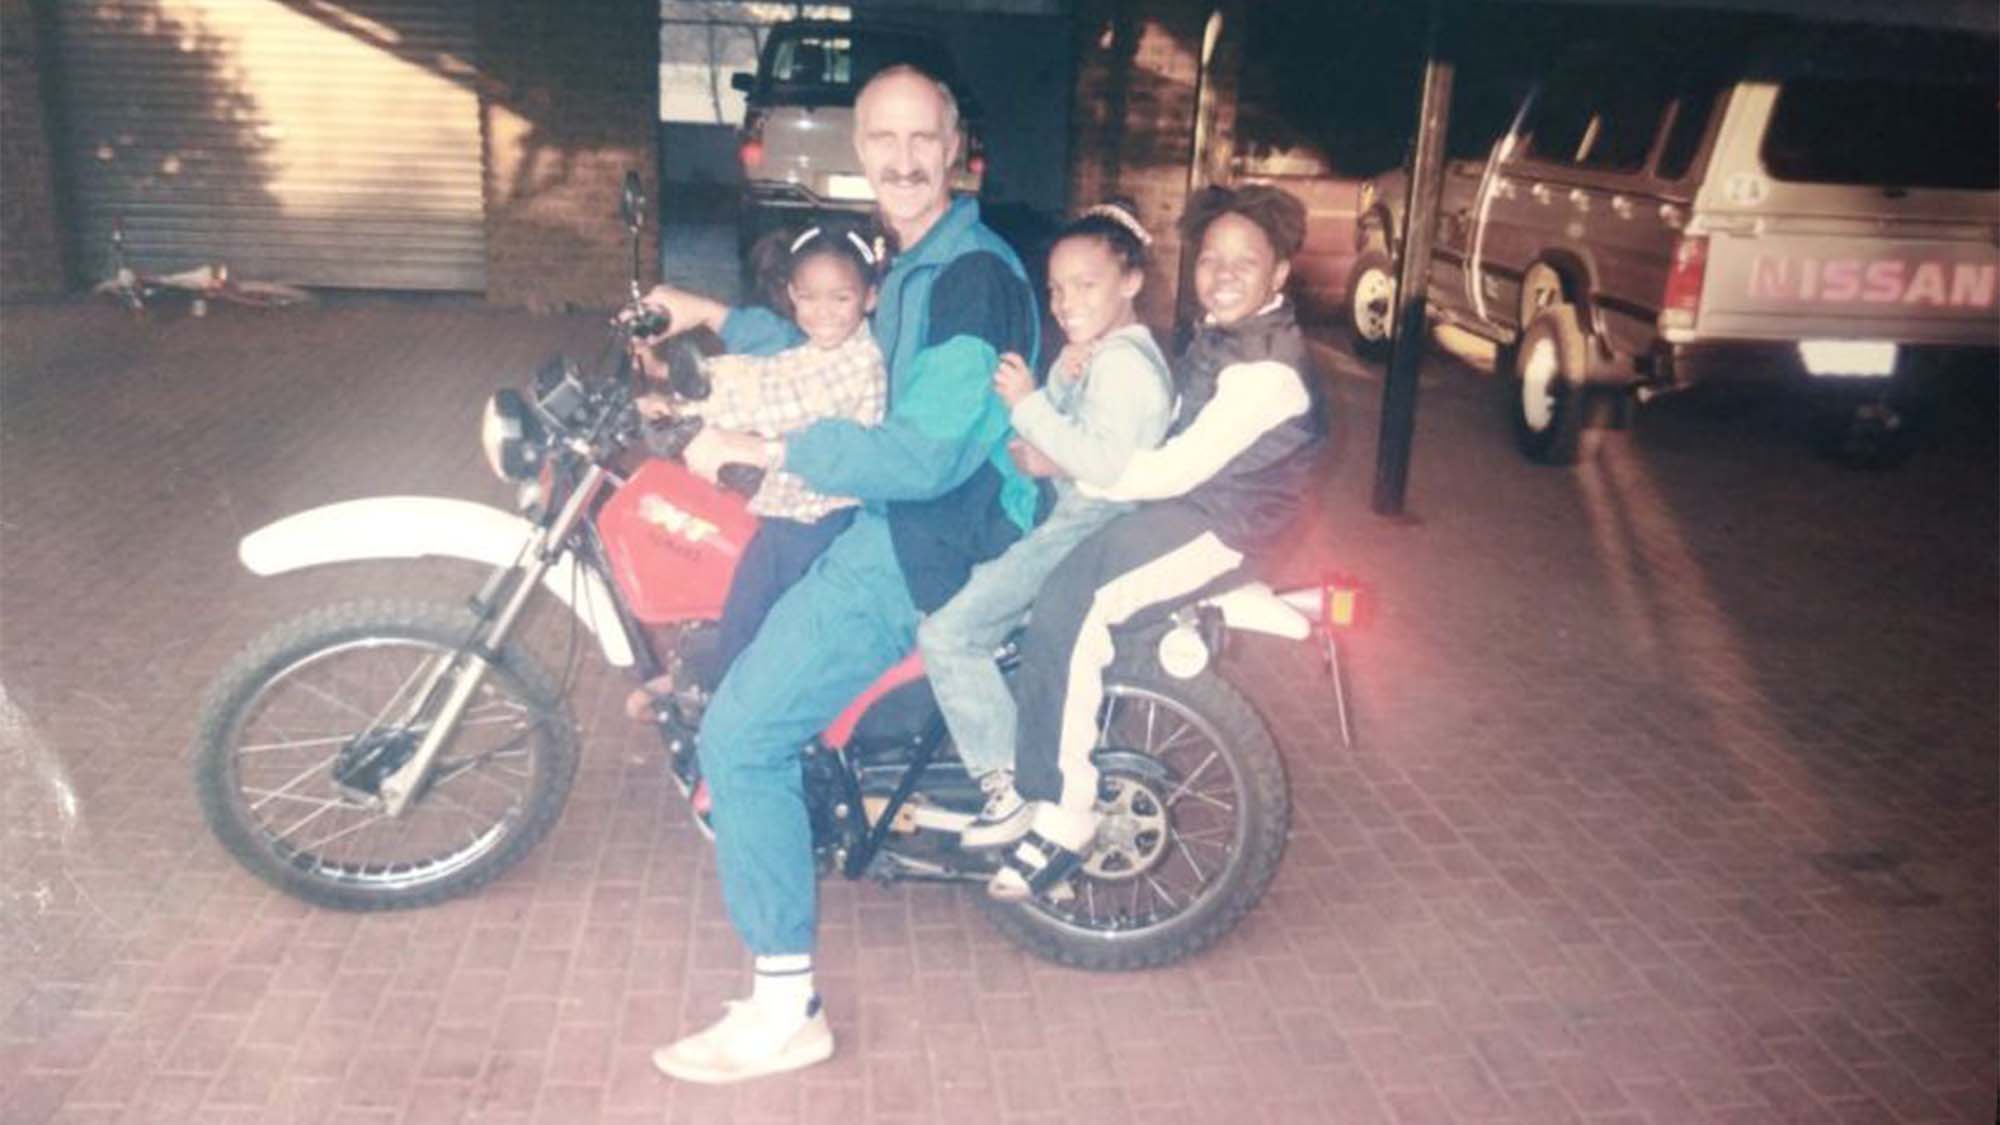 Wilco and their family on their motorbike provided by God.